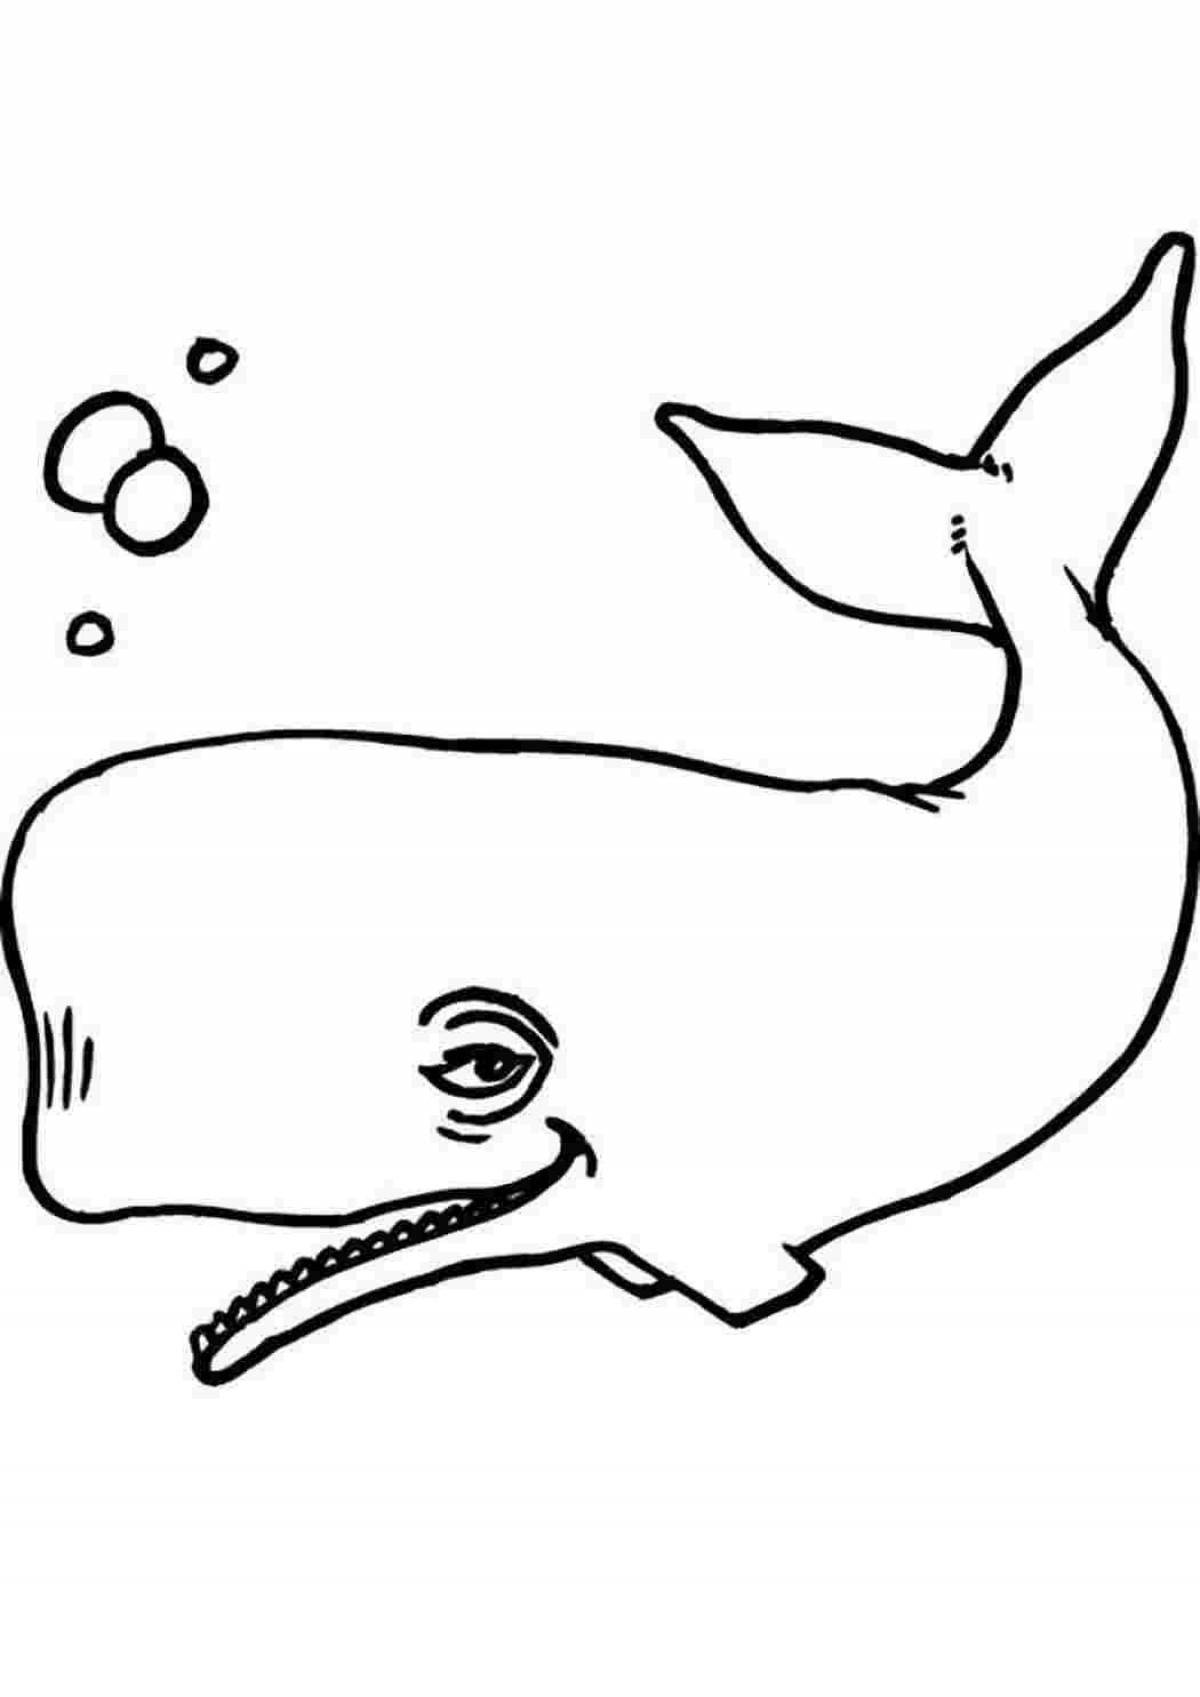 Art coloring drawing of a whale